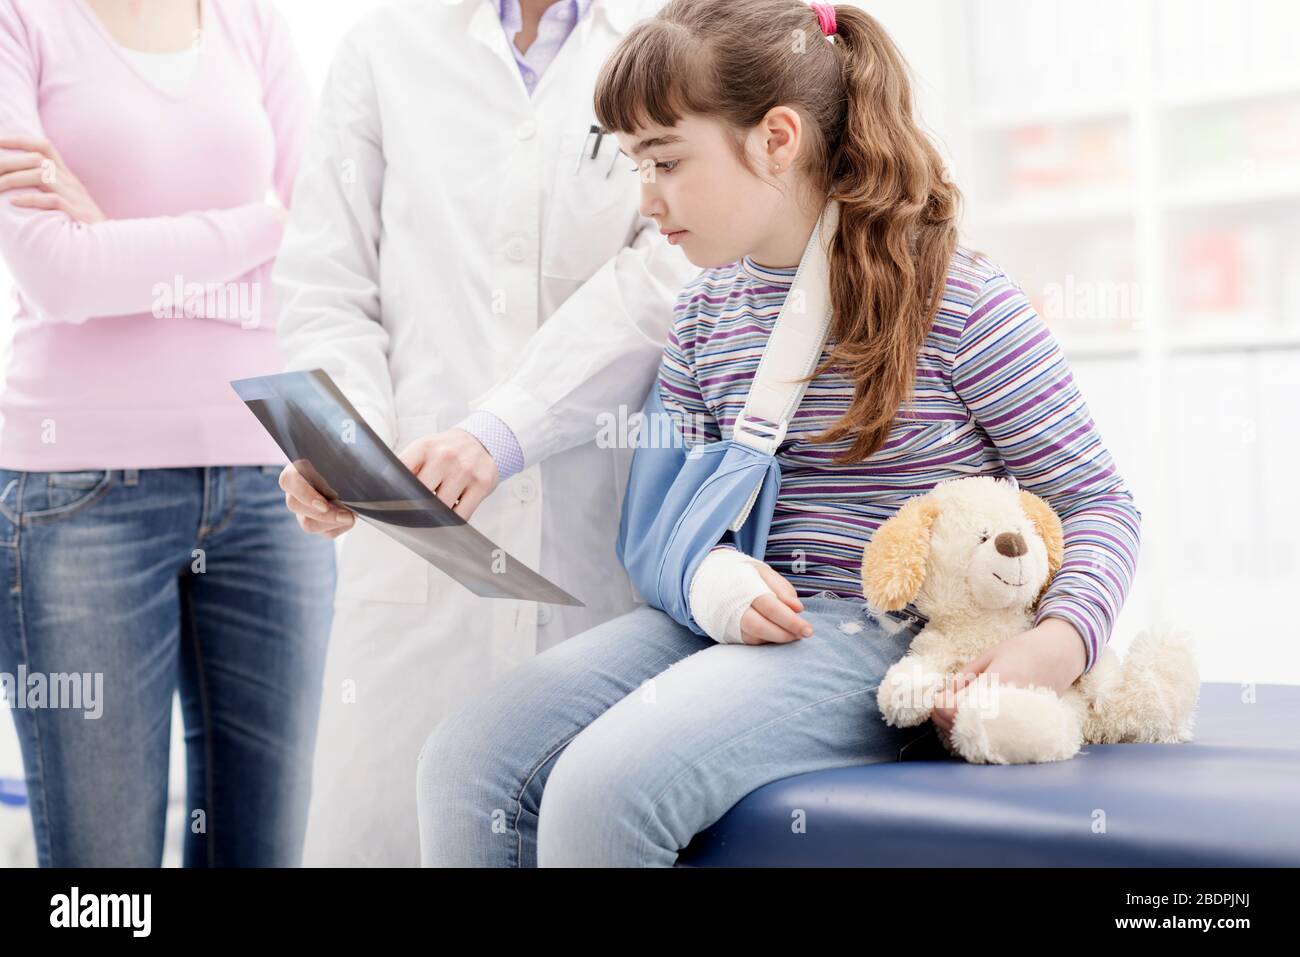 Friendly female doctor showing an x-ray image to a young patient with broken arm, healthcare and children concept Stock Photo